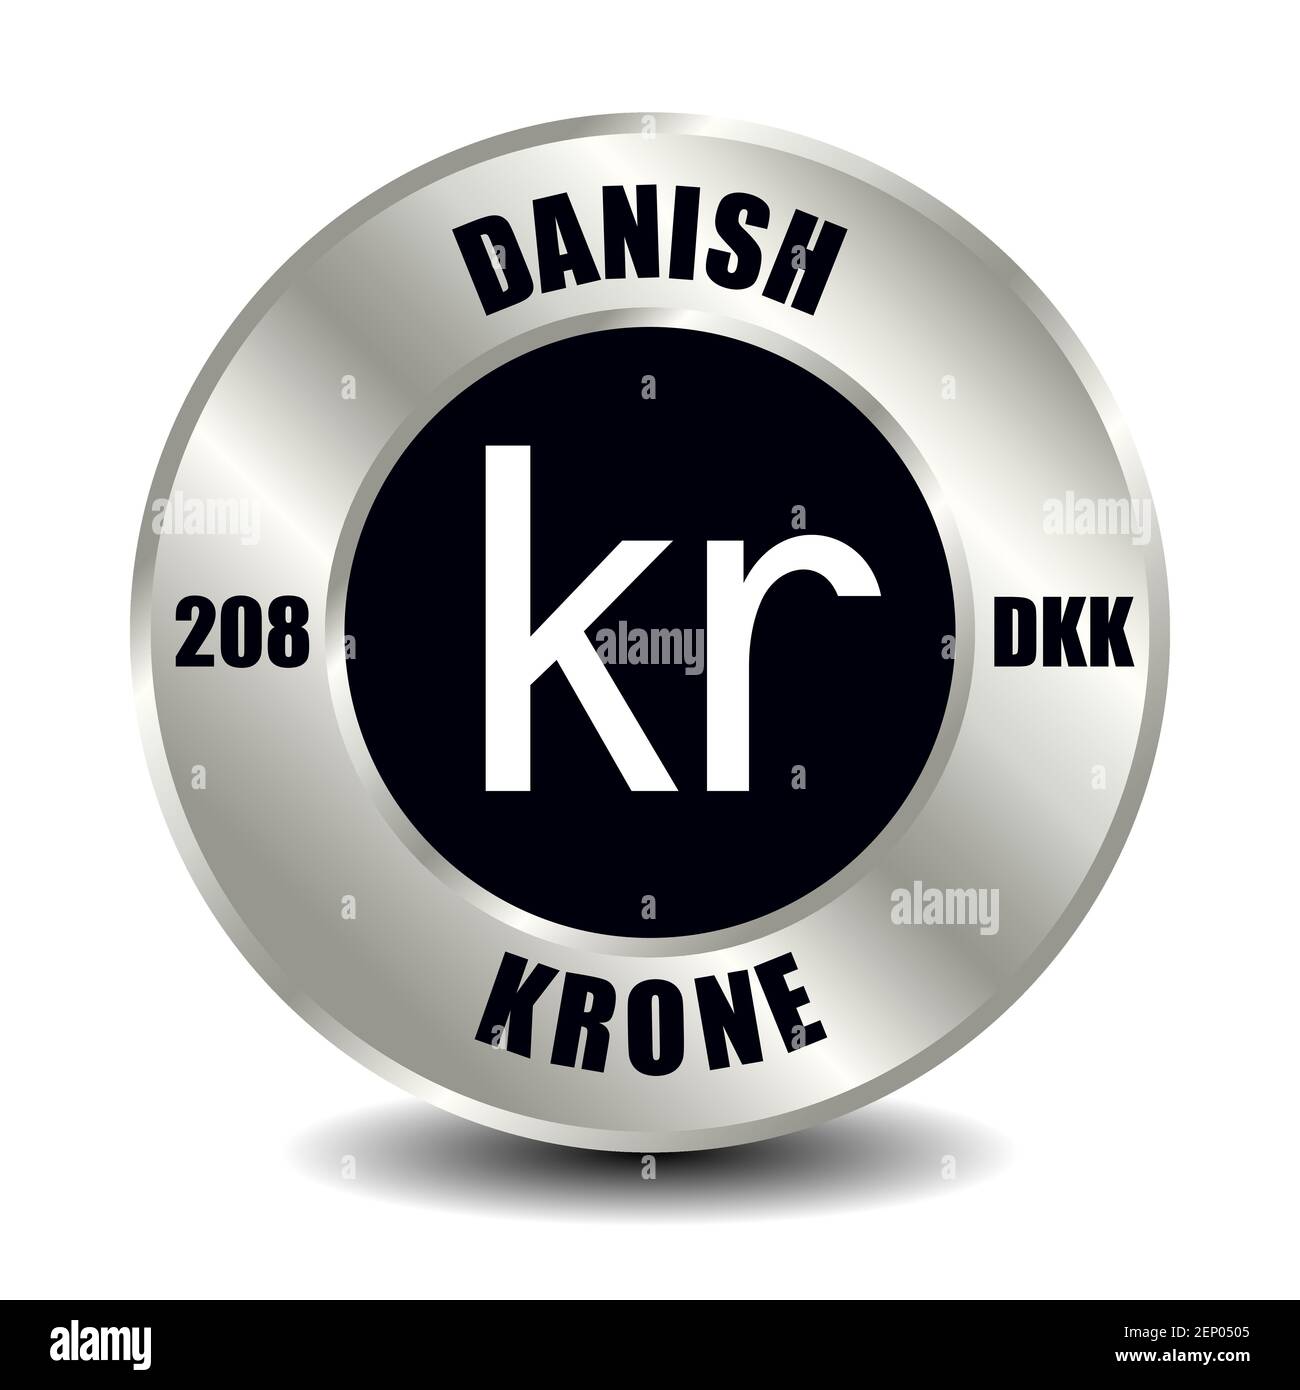 Denmark money icon isolated on round silver coin. Vector sign of currency symbol with international ISO code and abbreviation Stock Vector